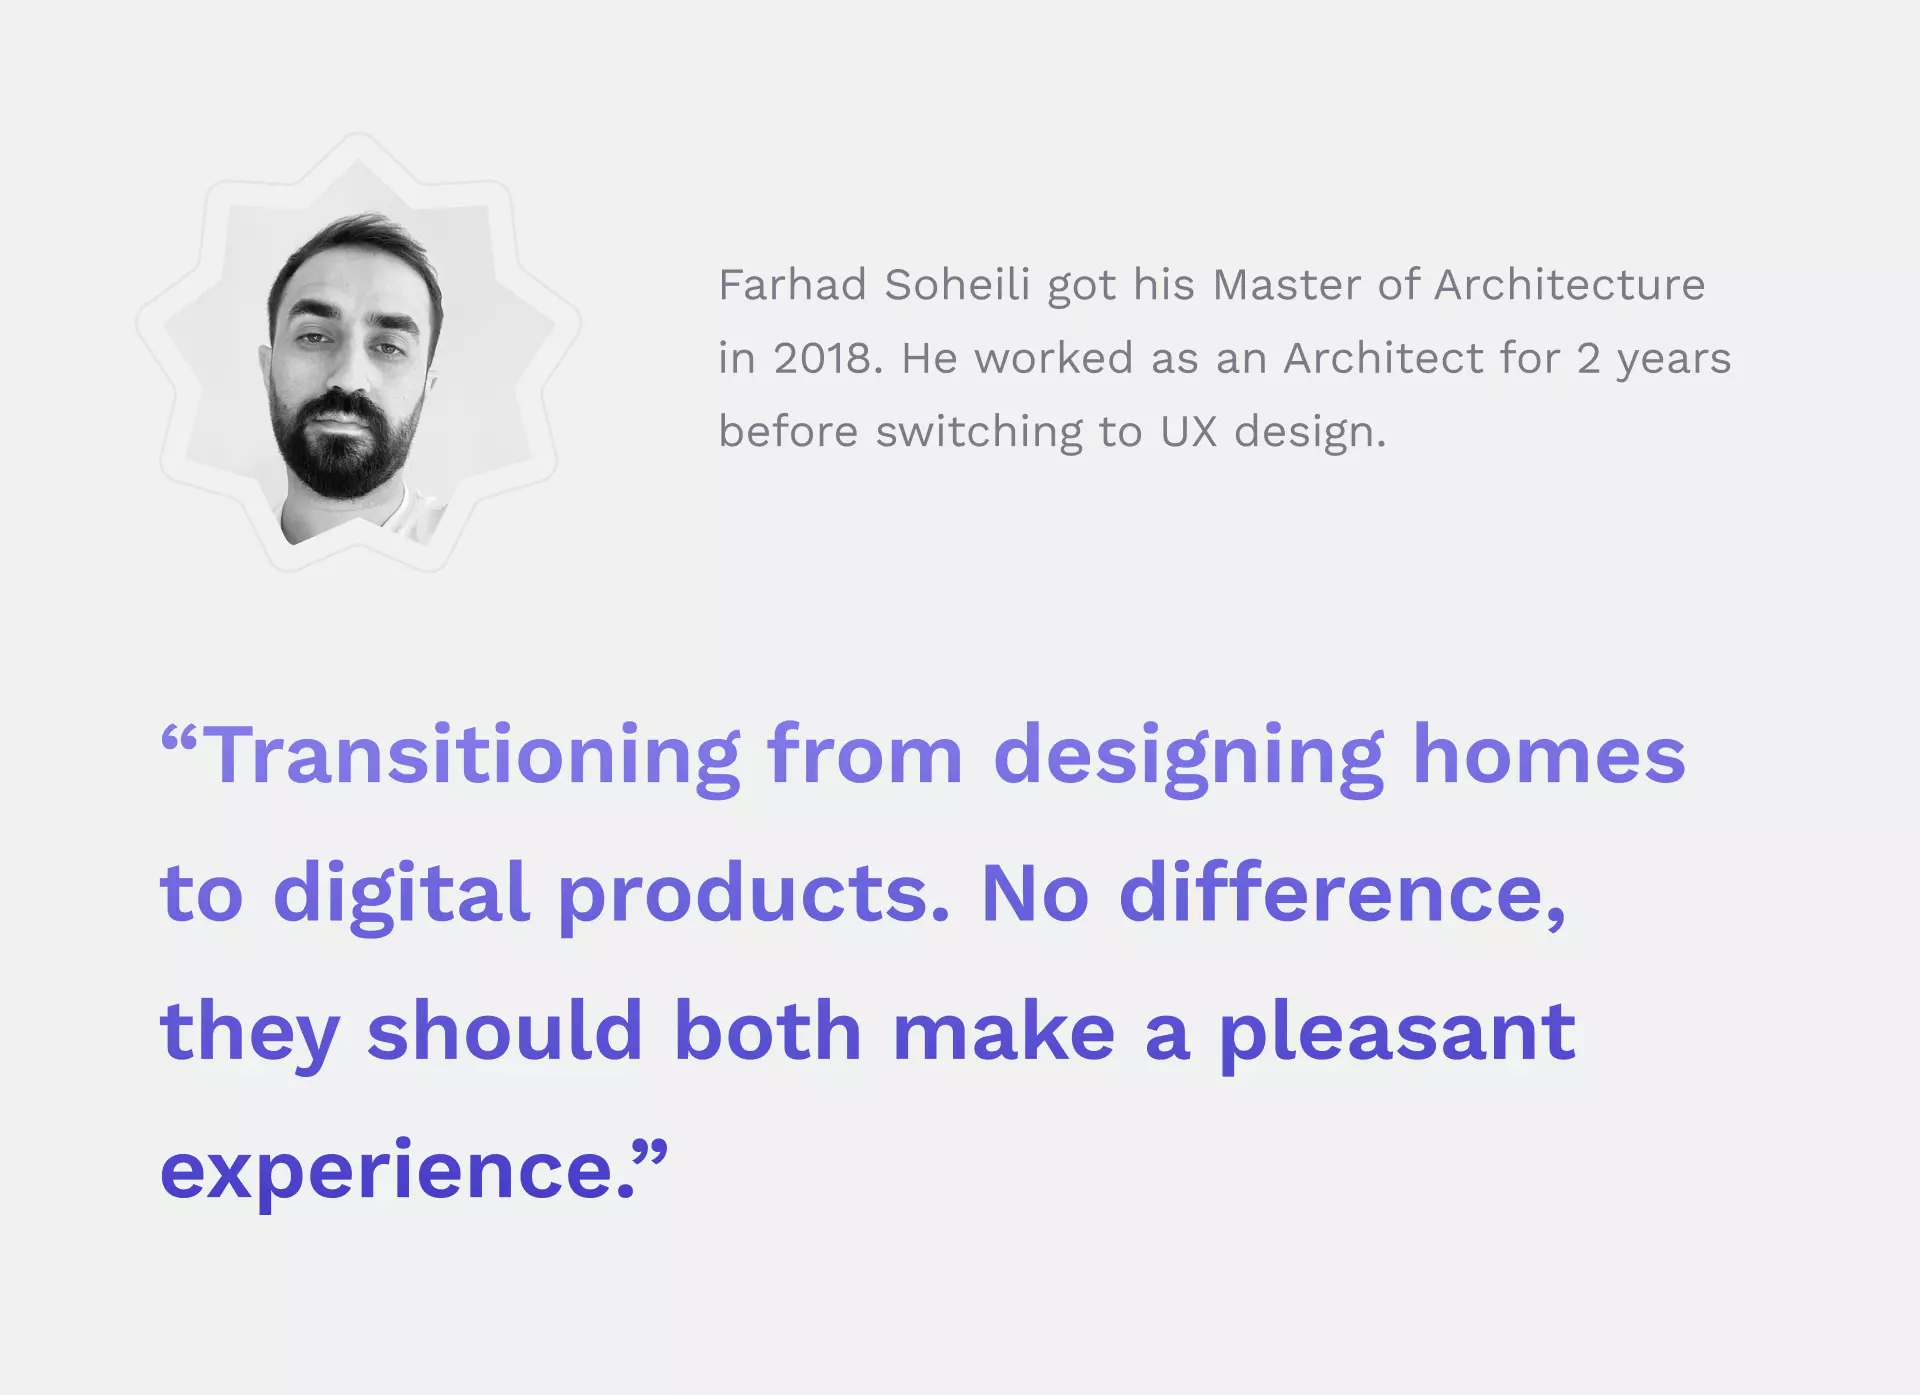 Farhad's introduction: "Farhad Soheili got his Master of Architecture in 2018. He worked as an Architect for 2 years before switching to UX design."